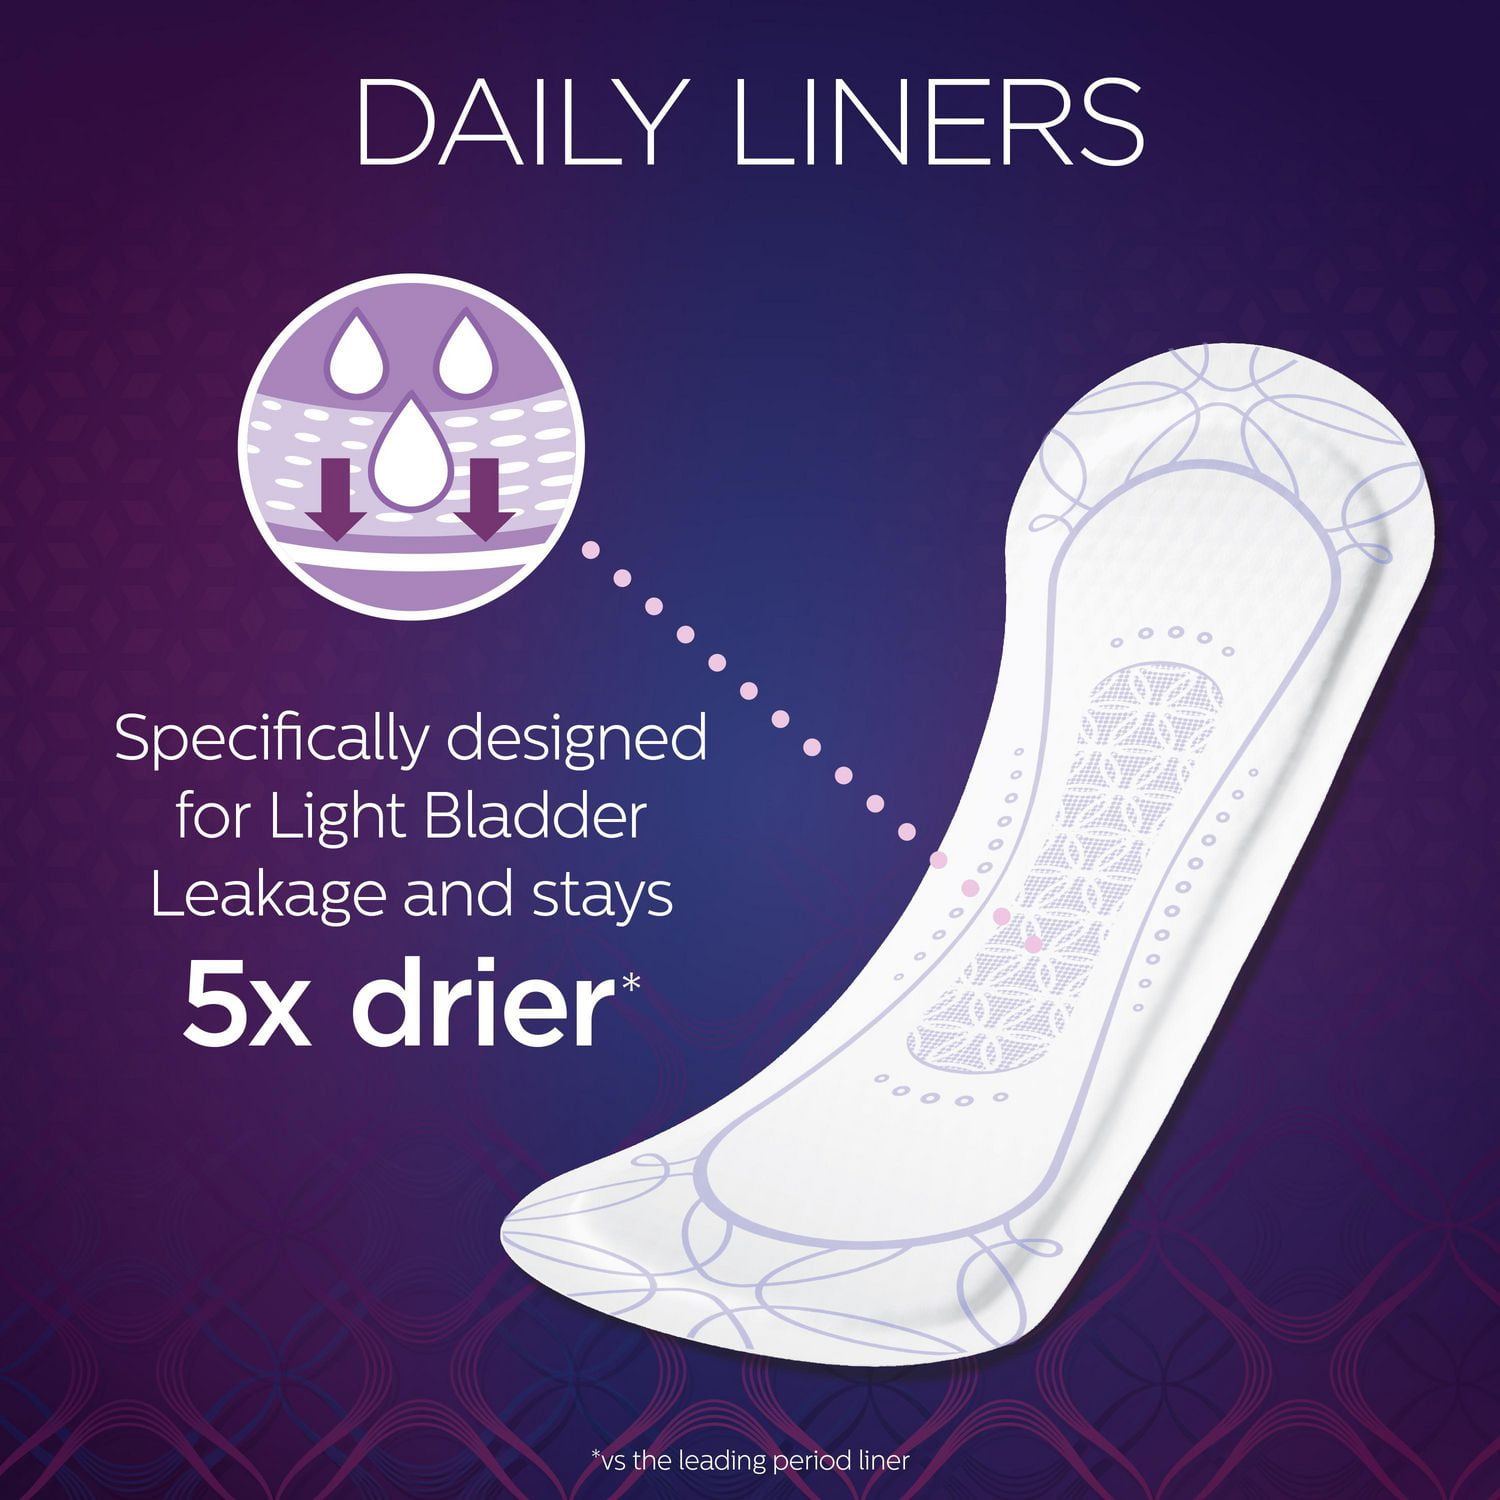 Poise Daily Microliners, Postpartum Incontinence Panty Liners